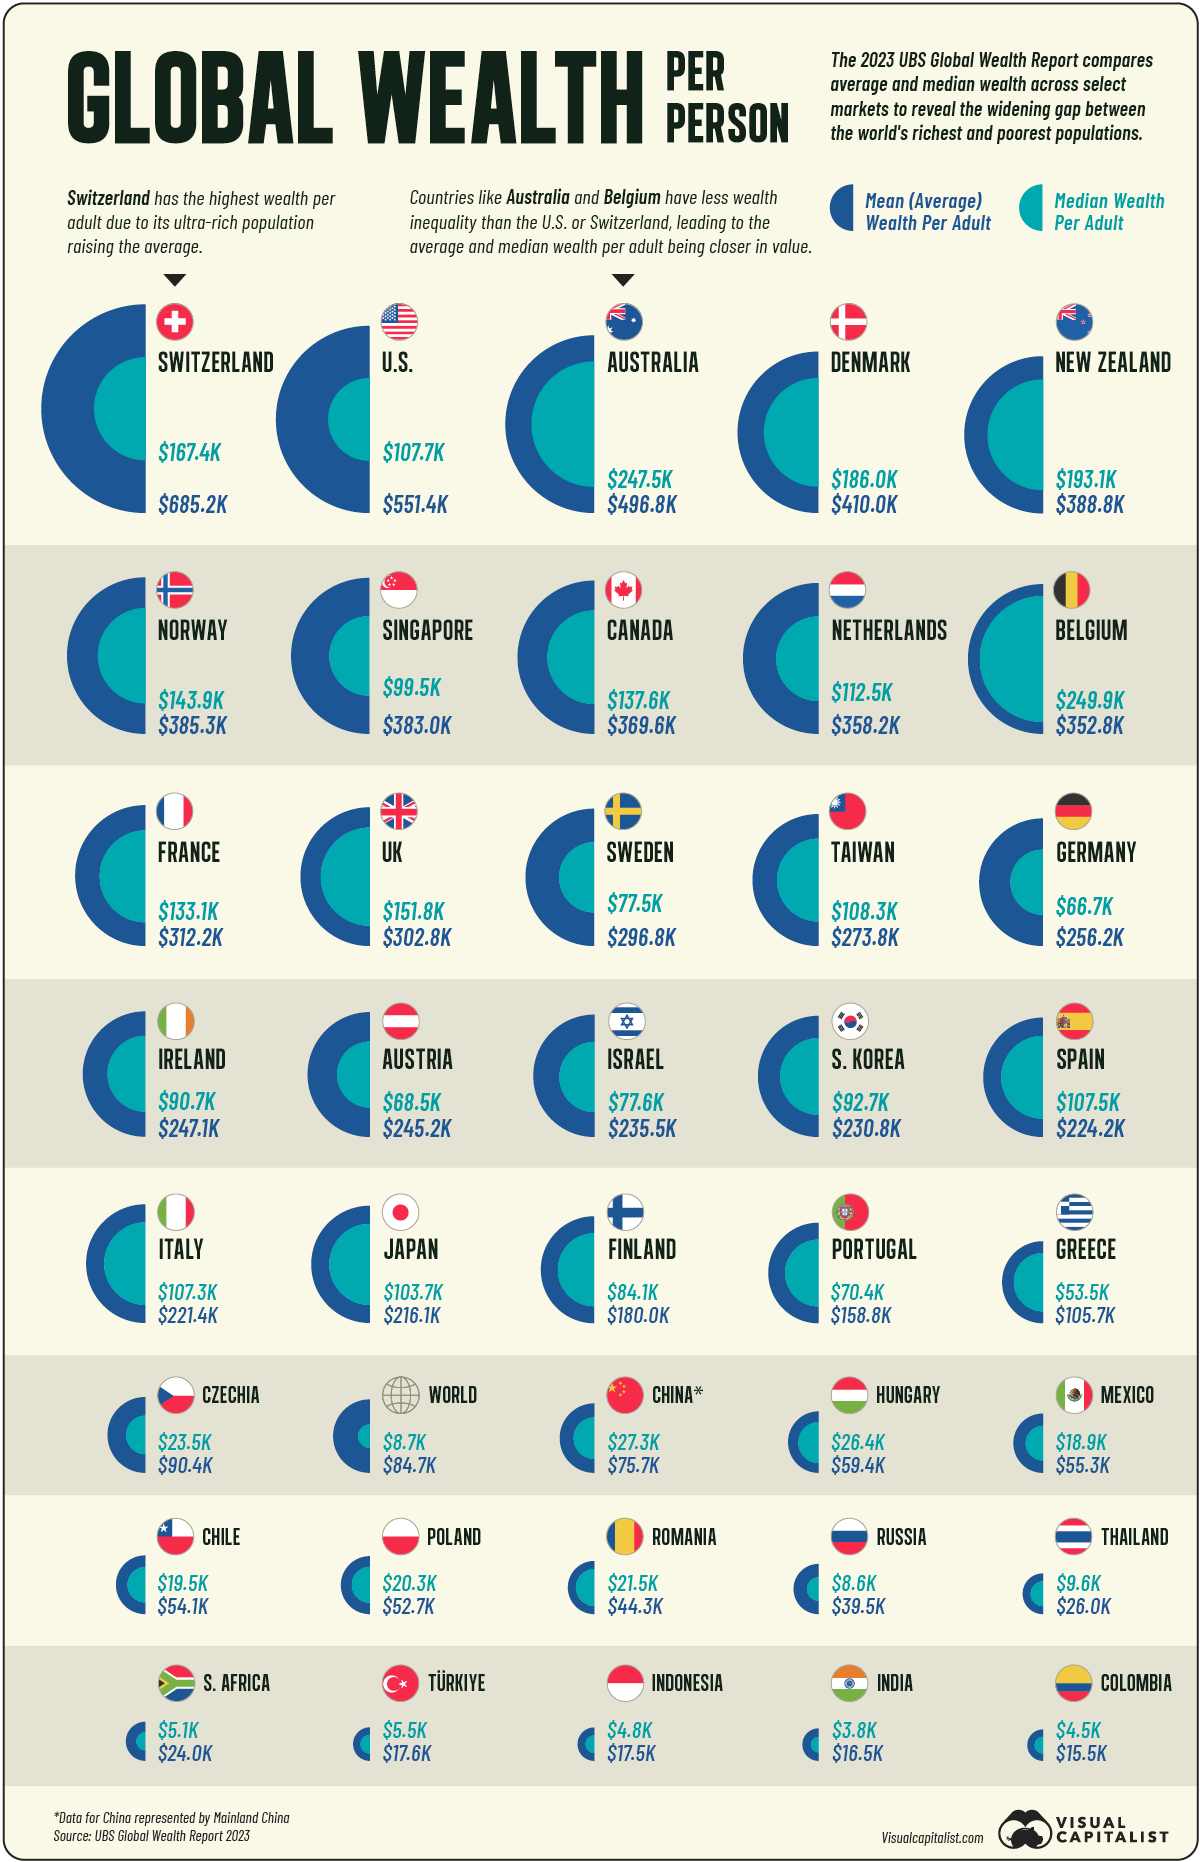 Visualizing the Top Countries by Wealth per Person